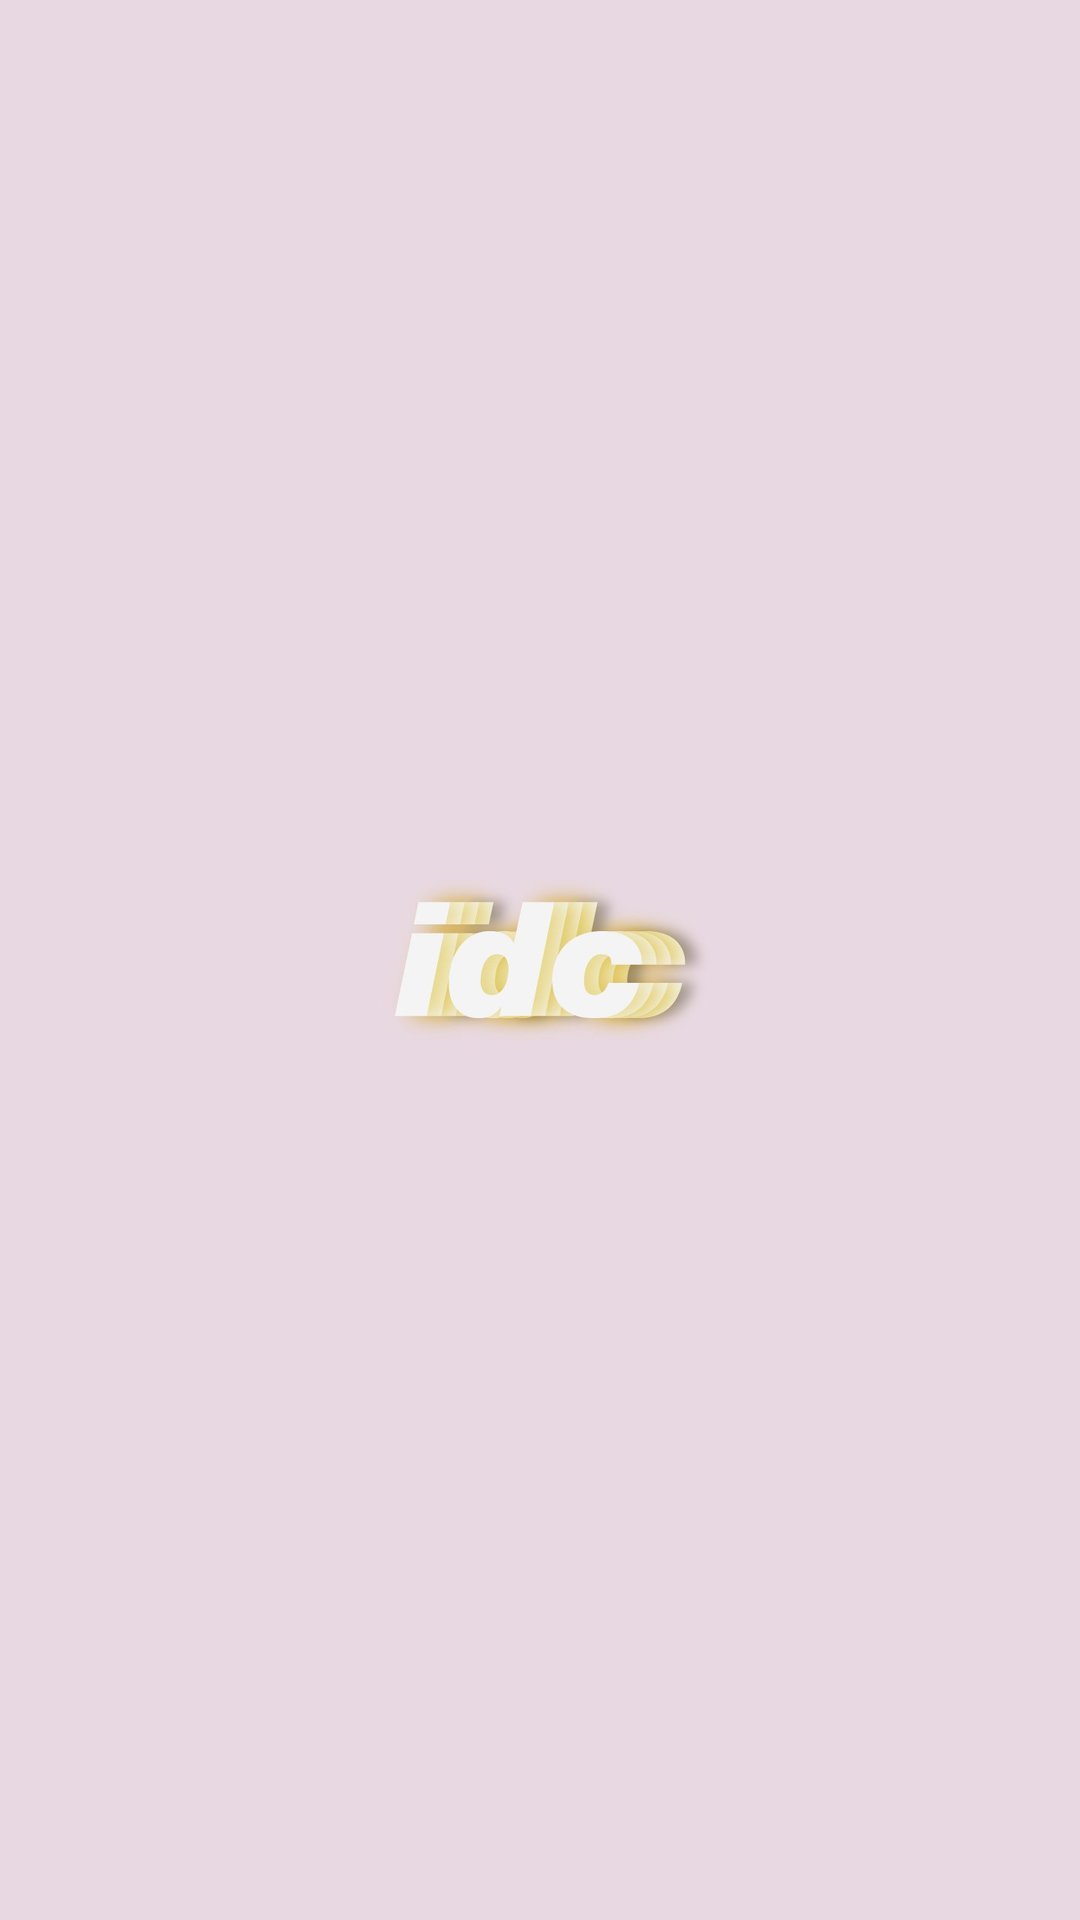 Idc Quotes I Dont Care Wallpaper On